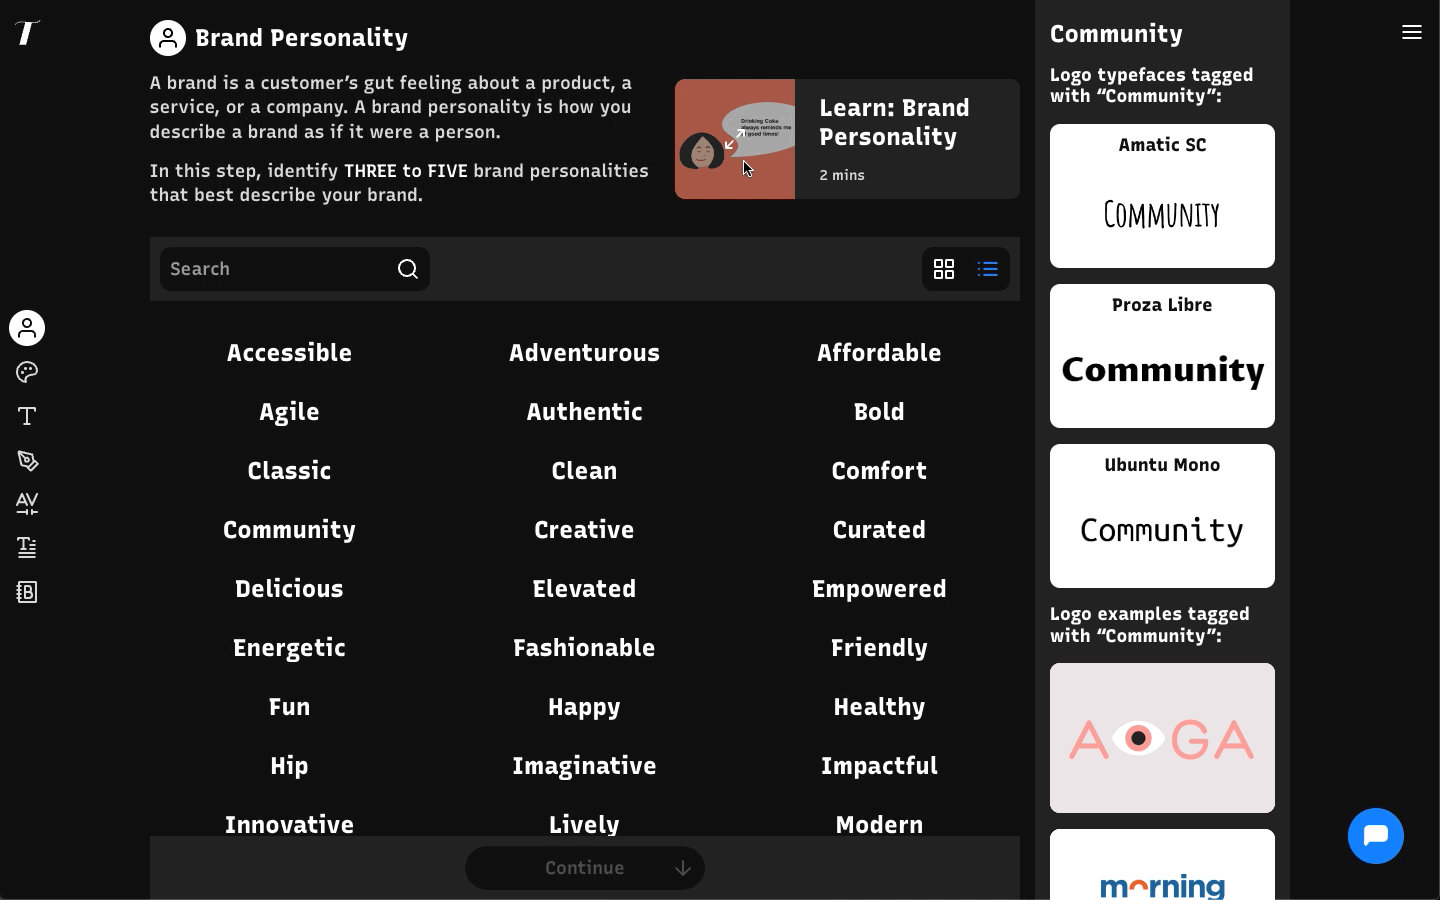 Click on the expand icon to open the learning material